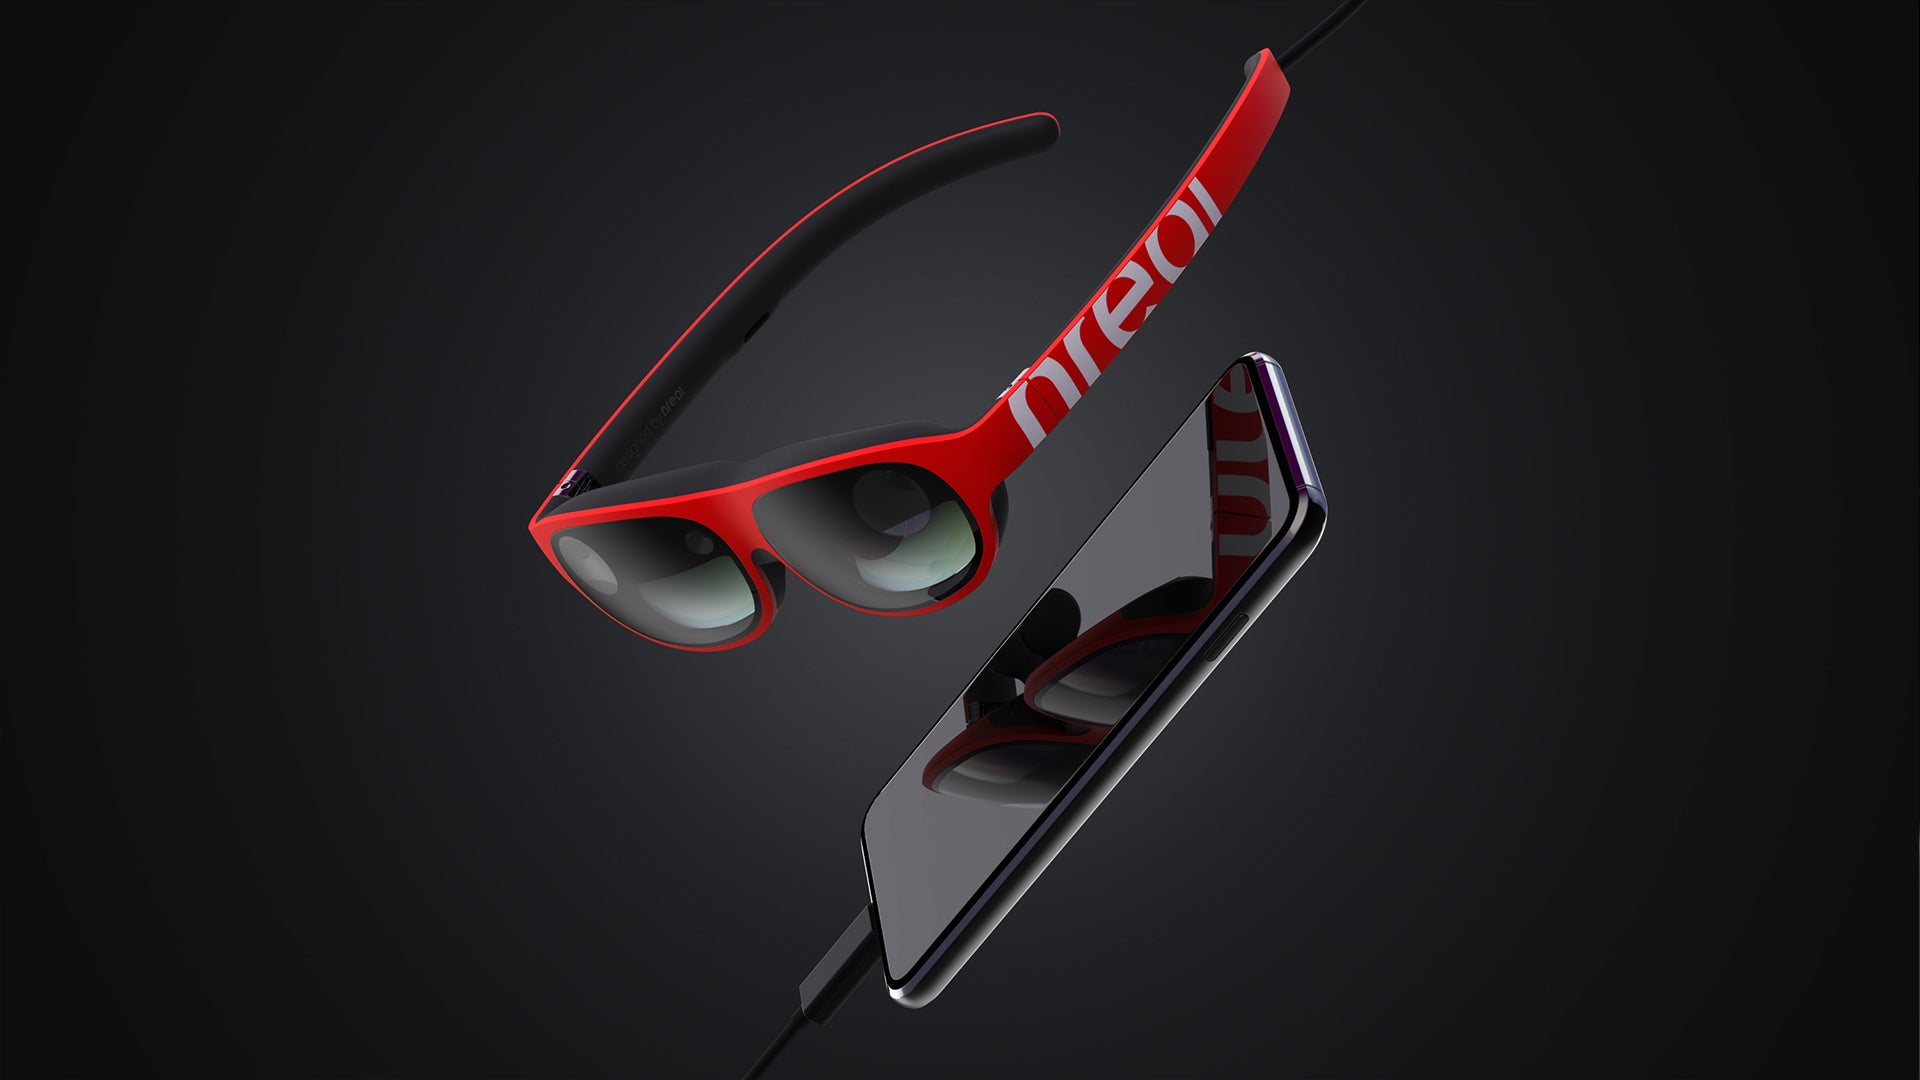 The Nreal Air glasses here may be far from mainstream, but when Apple and Samsung release something like this&amp;nbsp;&amp;ndash; prepare for a cultural shift - These 3 massive smartphone and tablet breakthroughs didn&#039;t happen in 2022, but likely will in 2023!